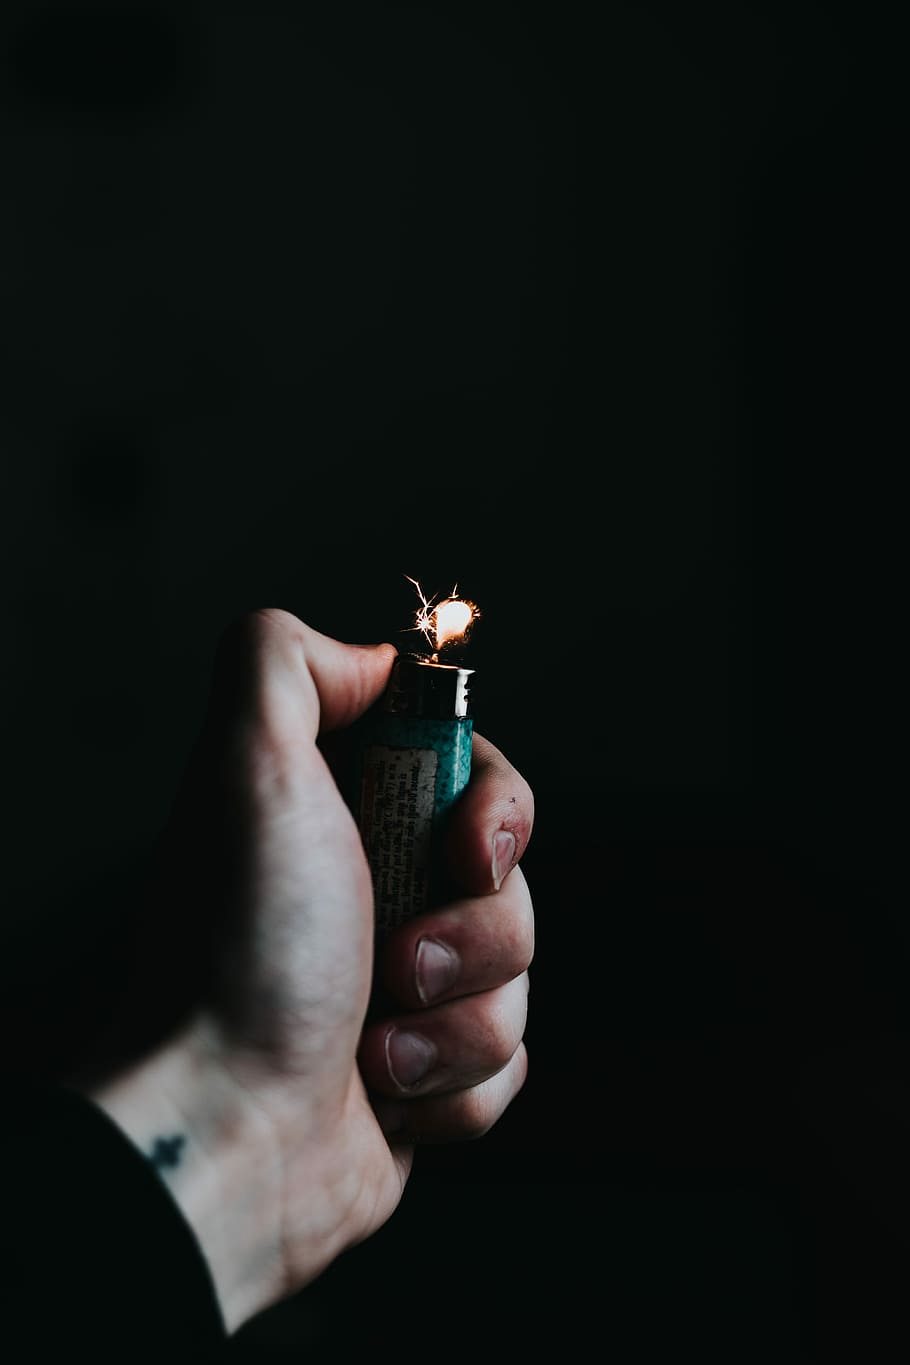 person holding green lighter, person using teal lighter, flame